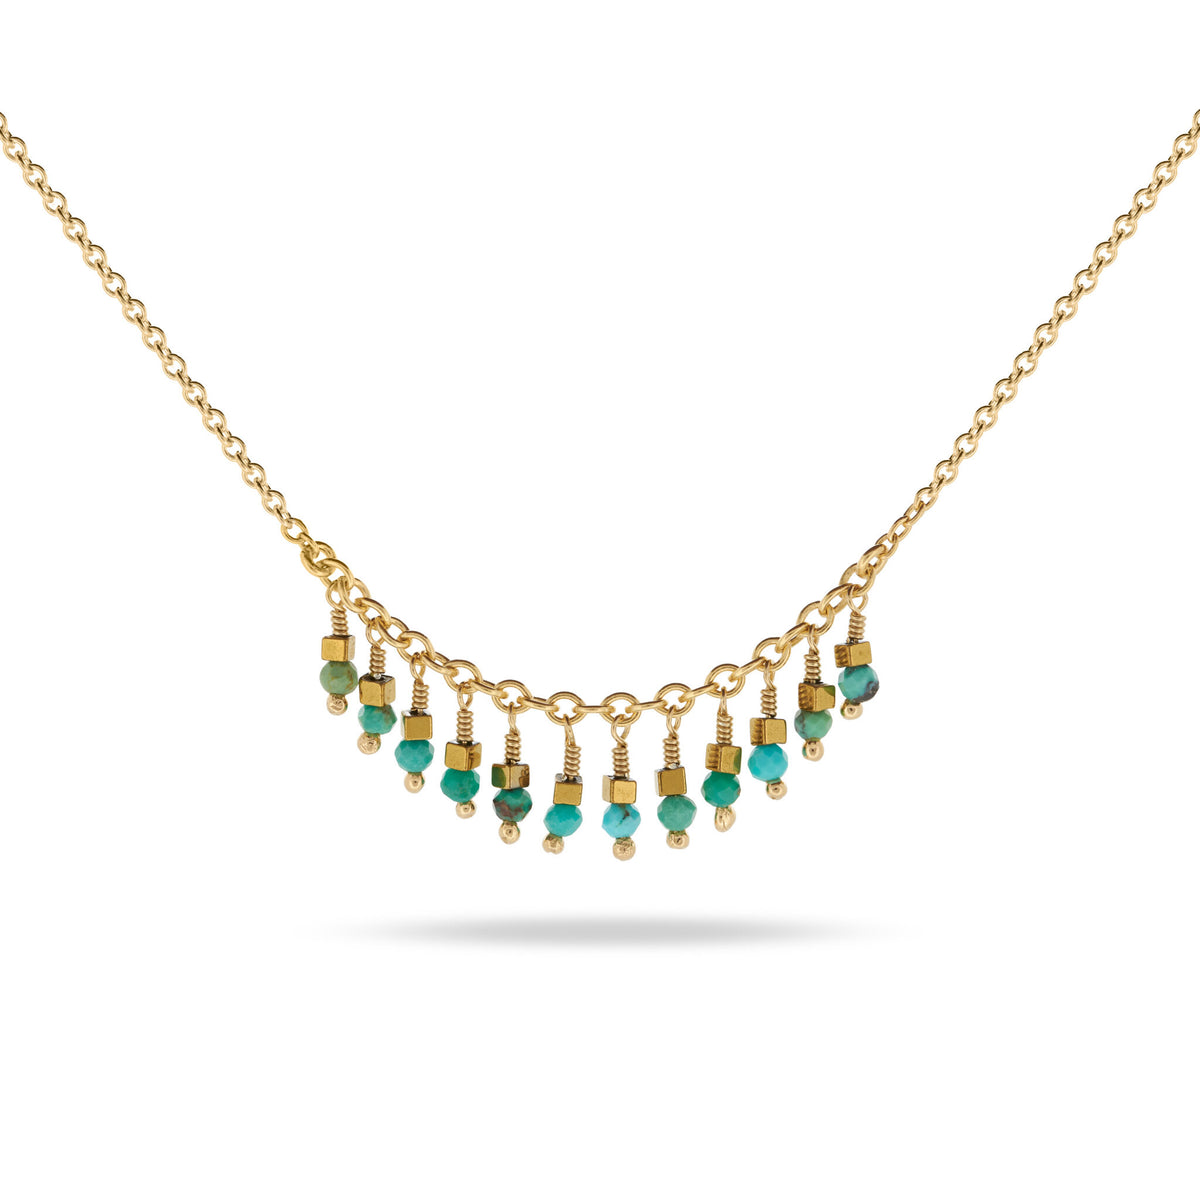 Mim Best Bead necklace, 14ct Gold vermeil, Turquoise, electroplated Hematite